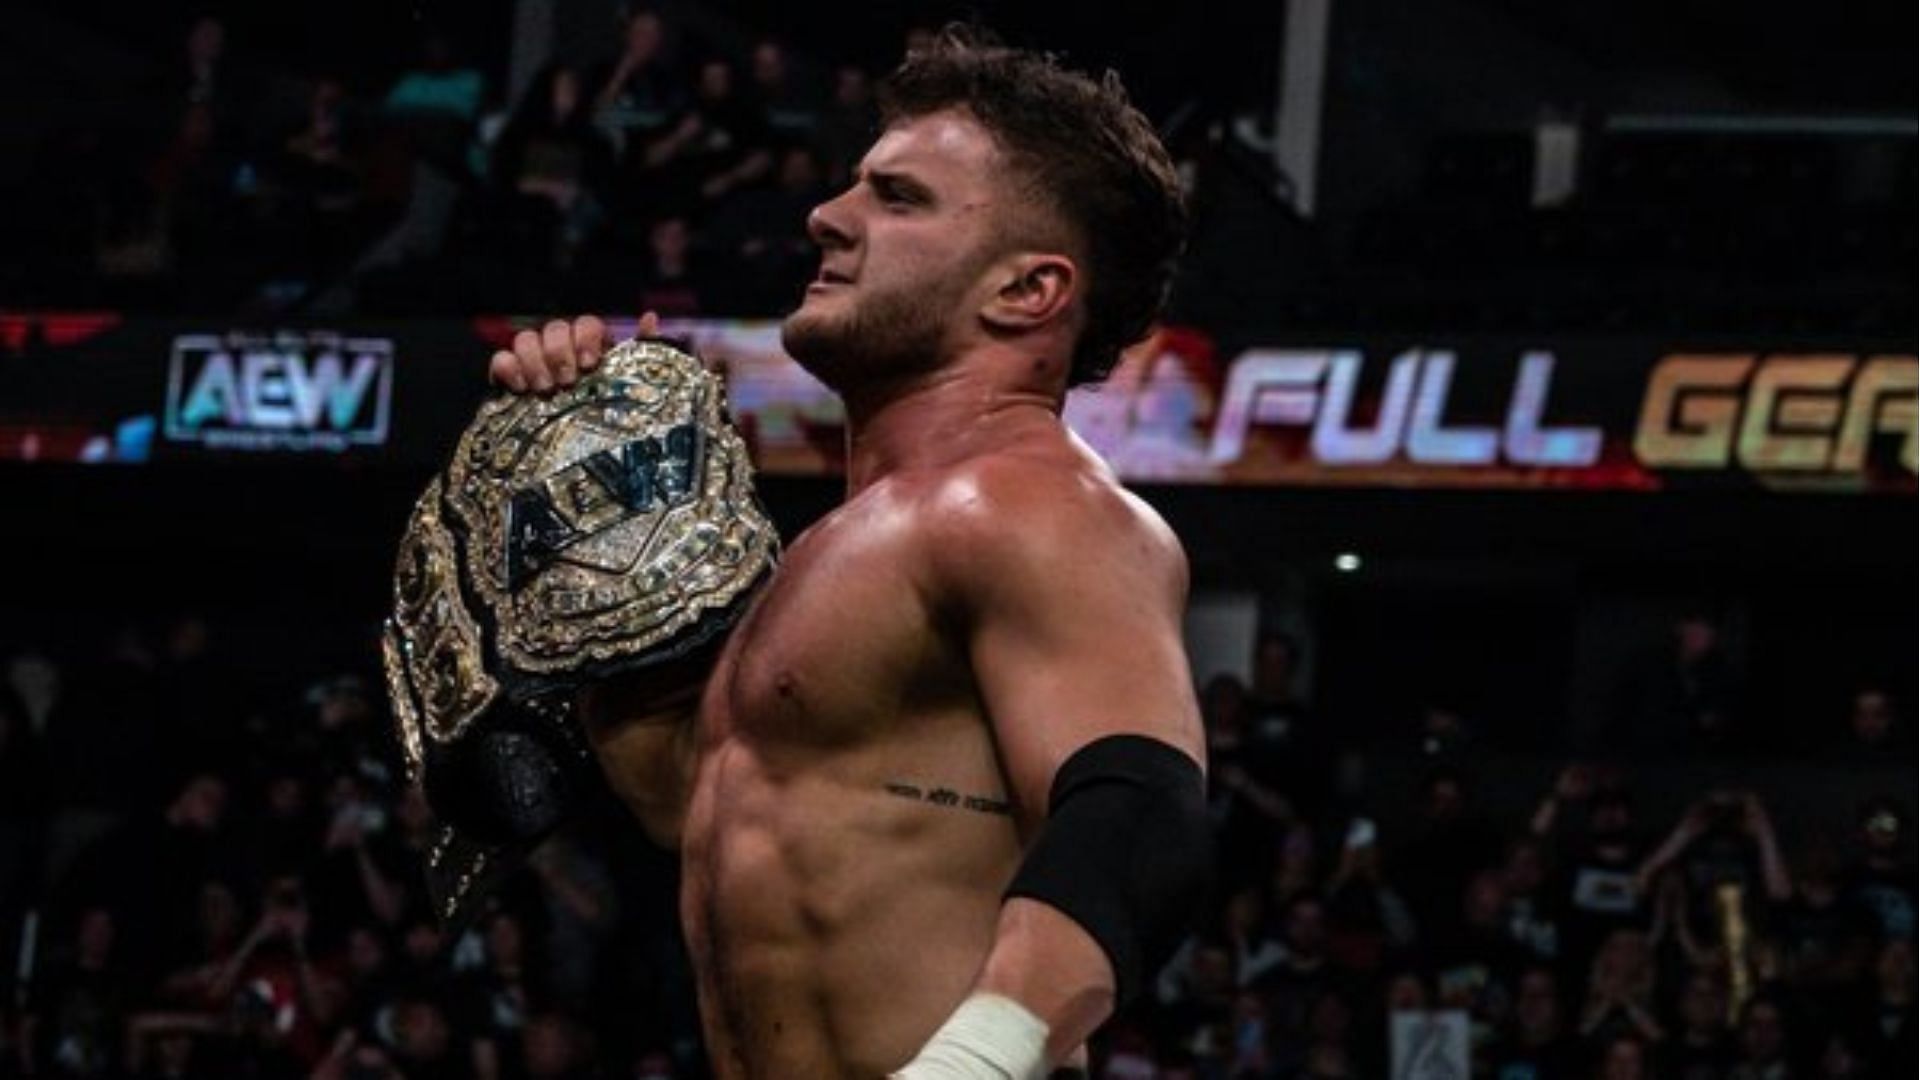 MJF Becomes AEW World Champion At Full Gear